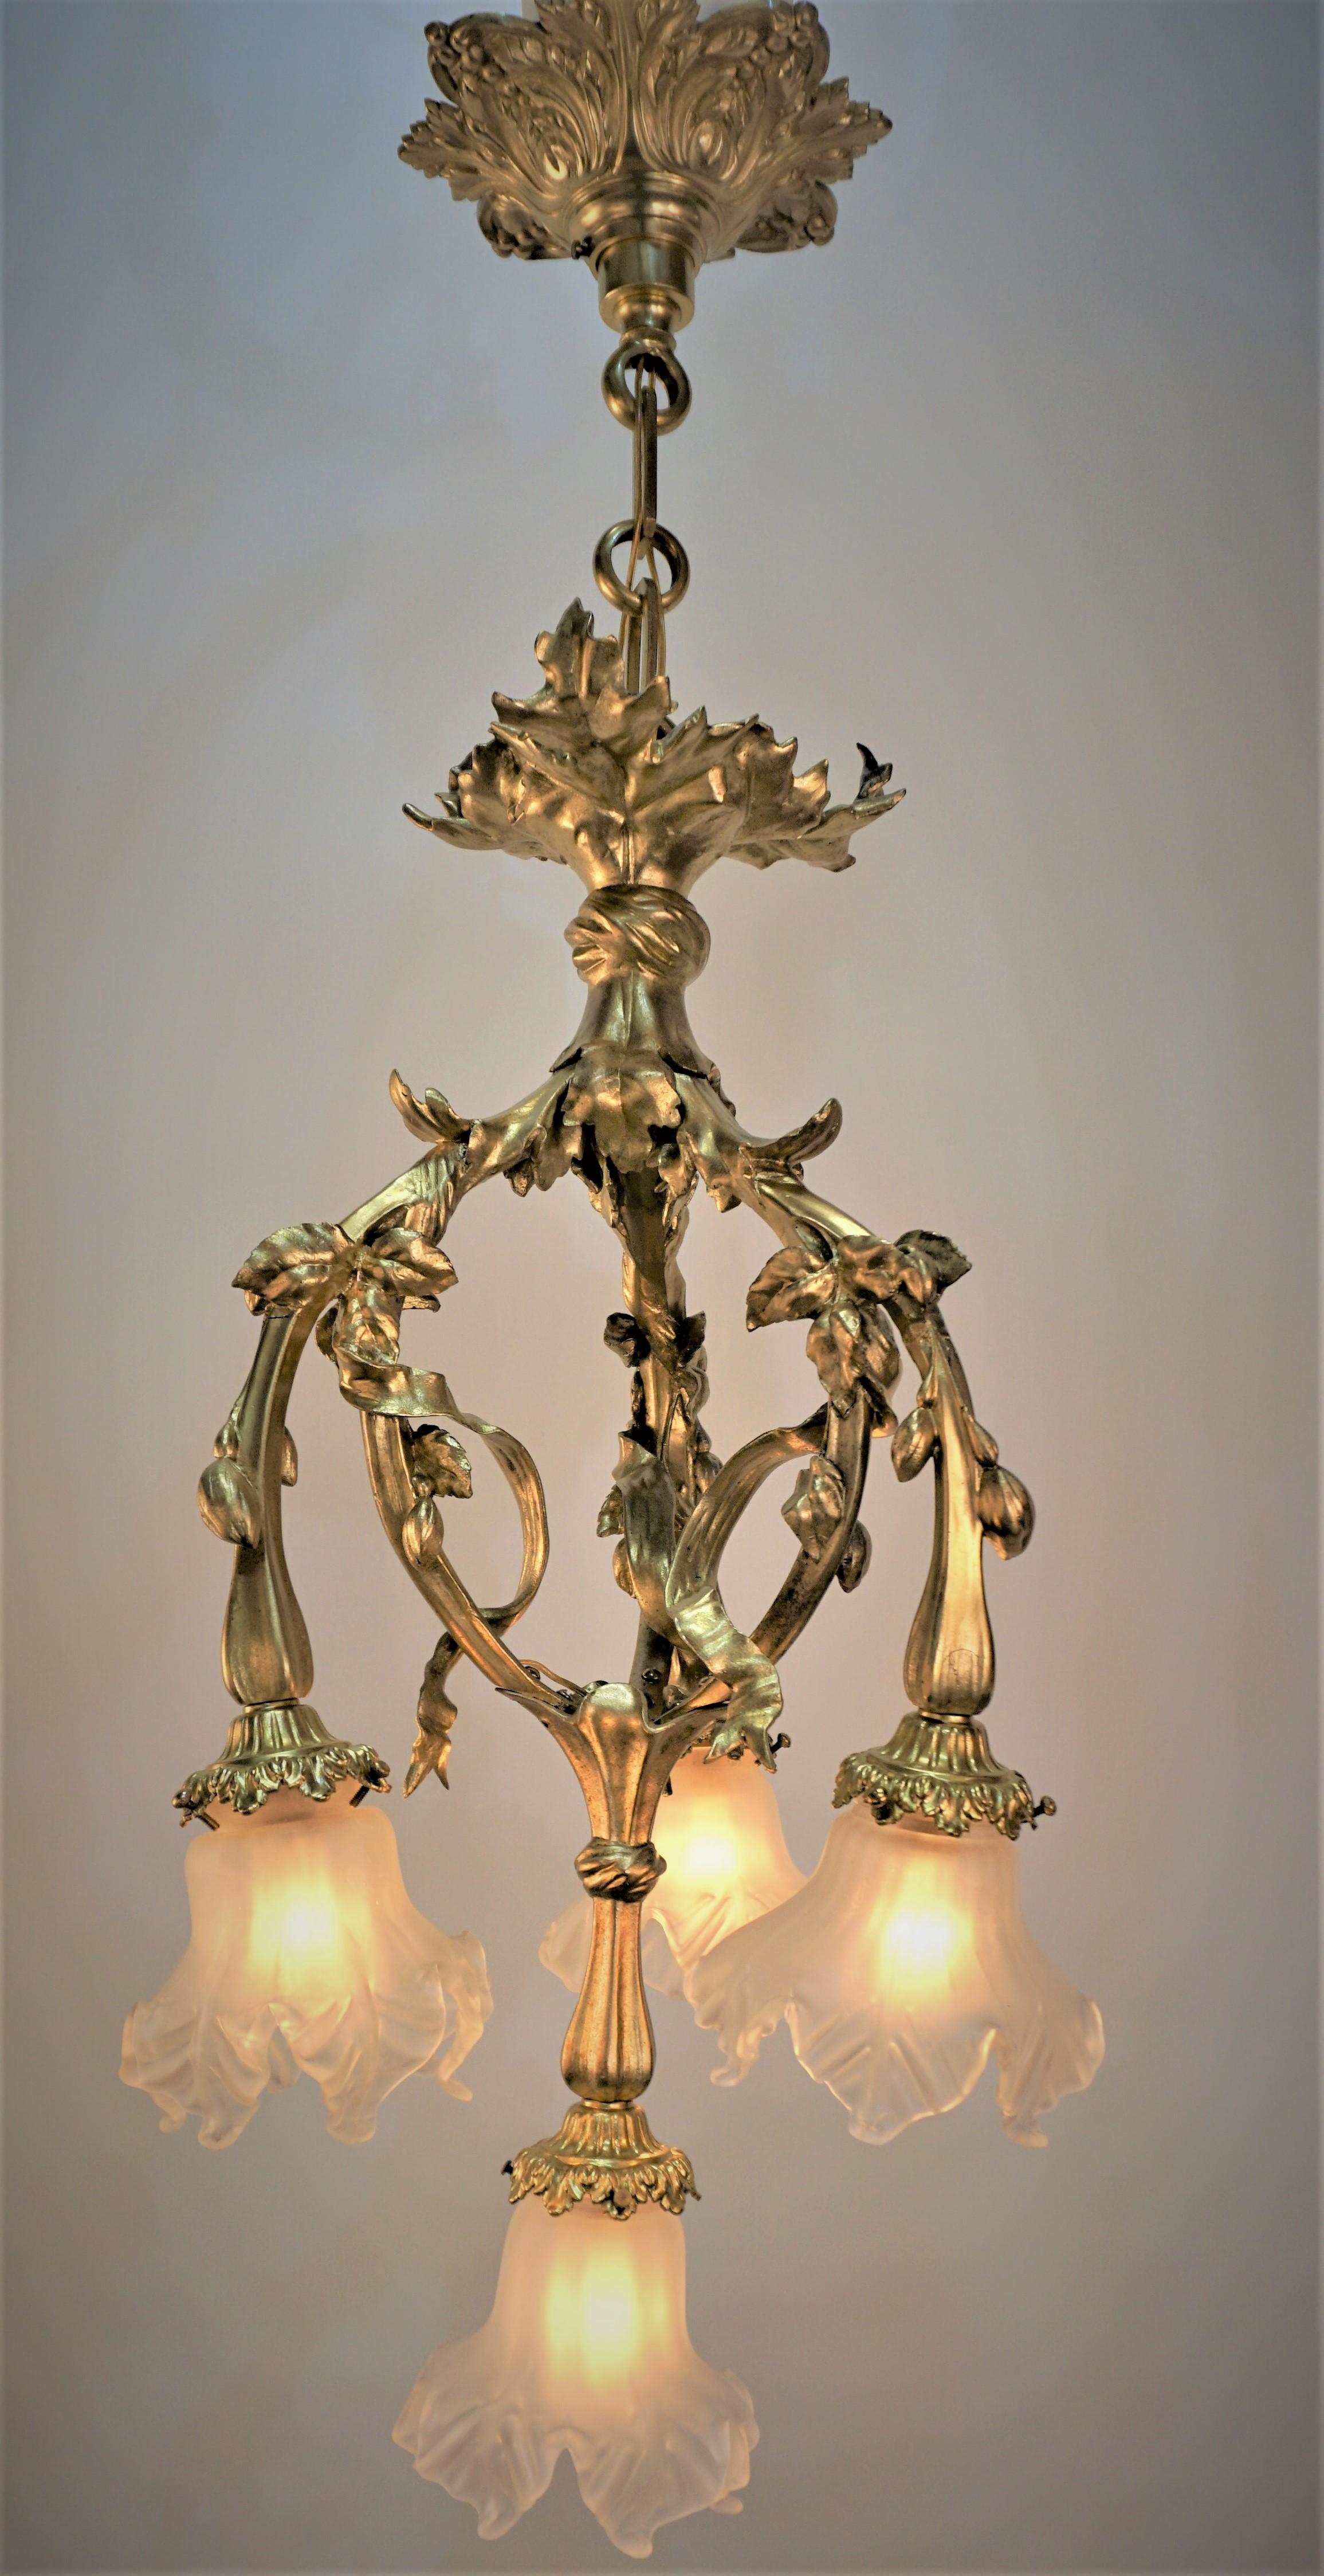 French circle 1900 bronze art nouveau chandelier with blown glass shades.
Professionally rewired and ready for installation. 